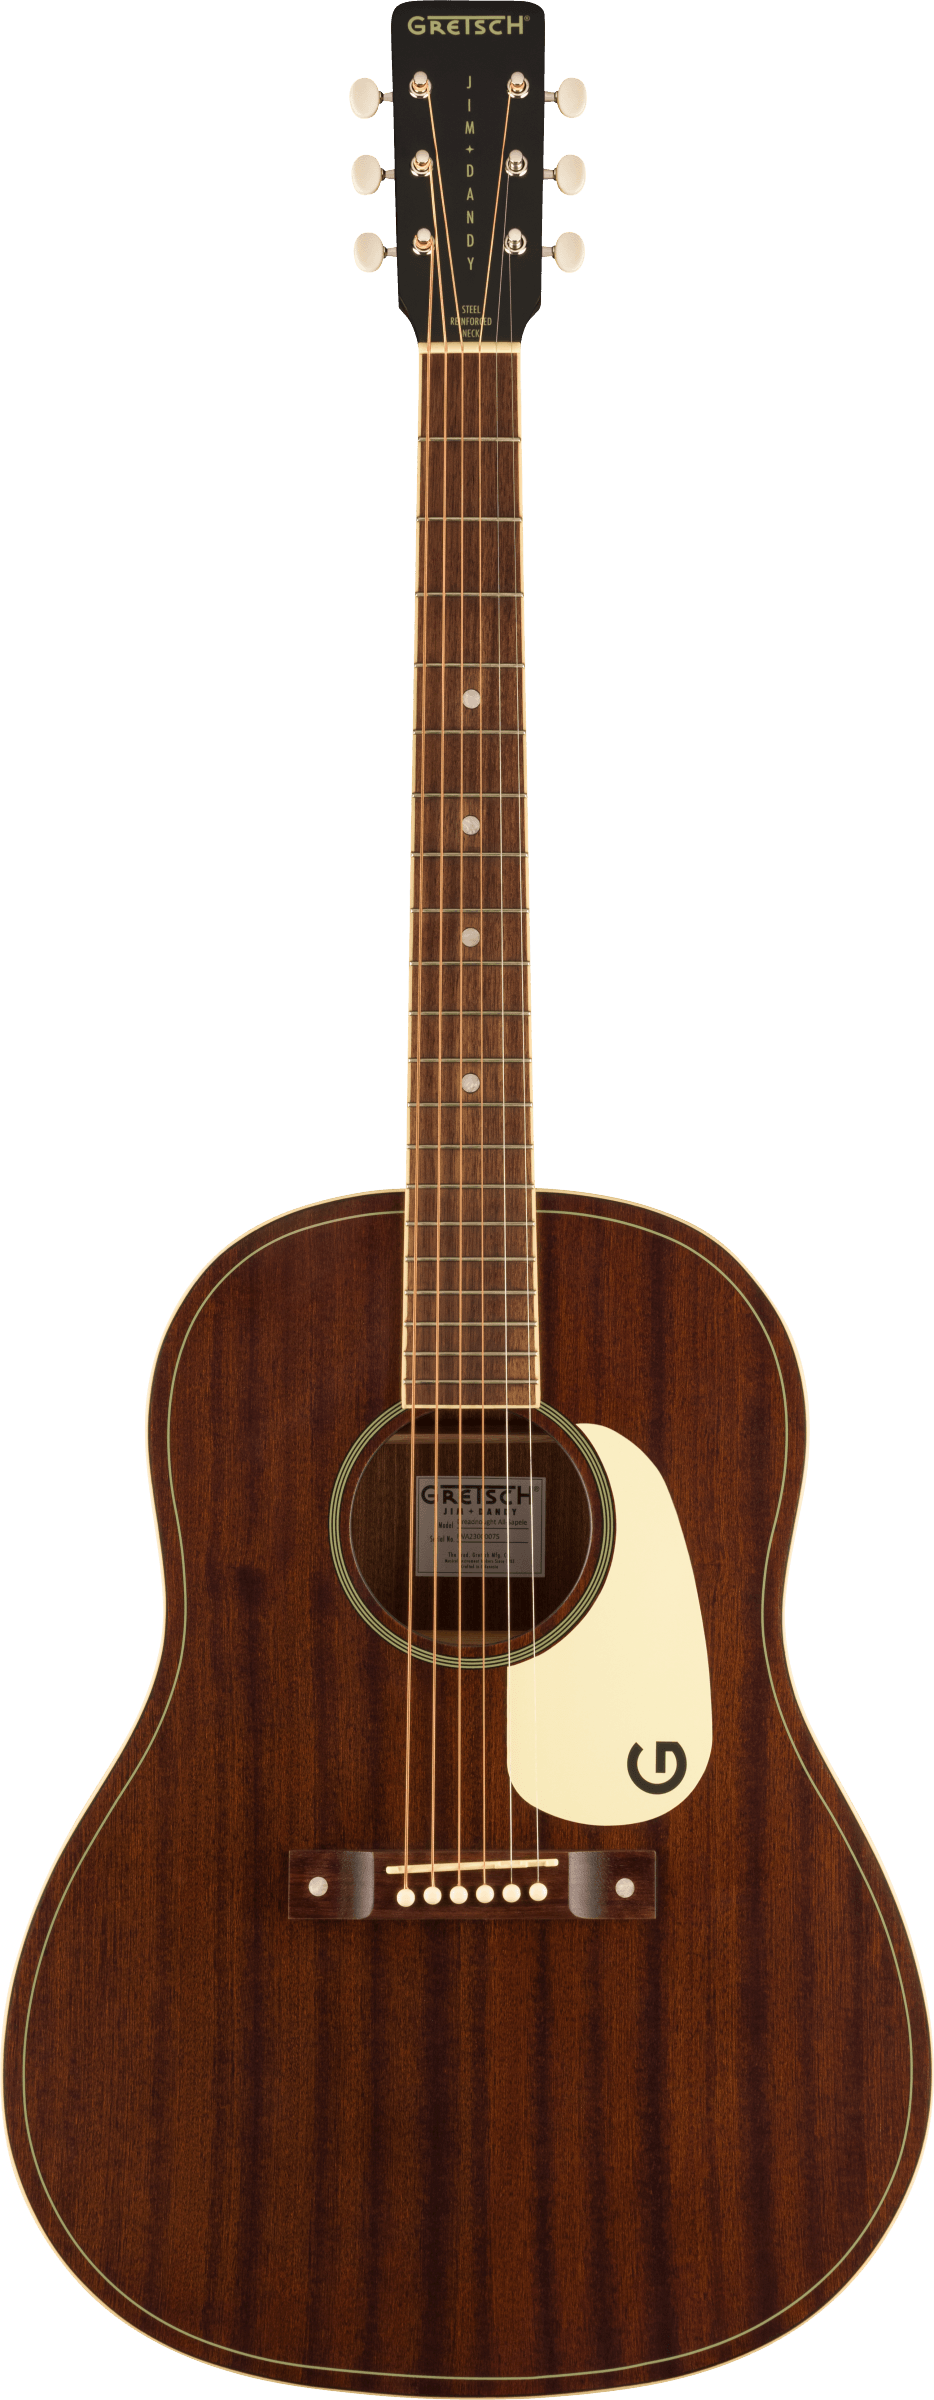 Gretsch Jim Dandy Dreadnought Acoustic Guitar, Frontier Stain (NEW)